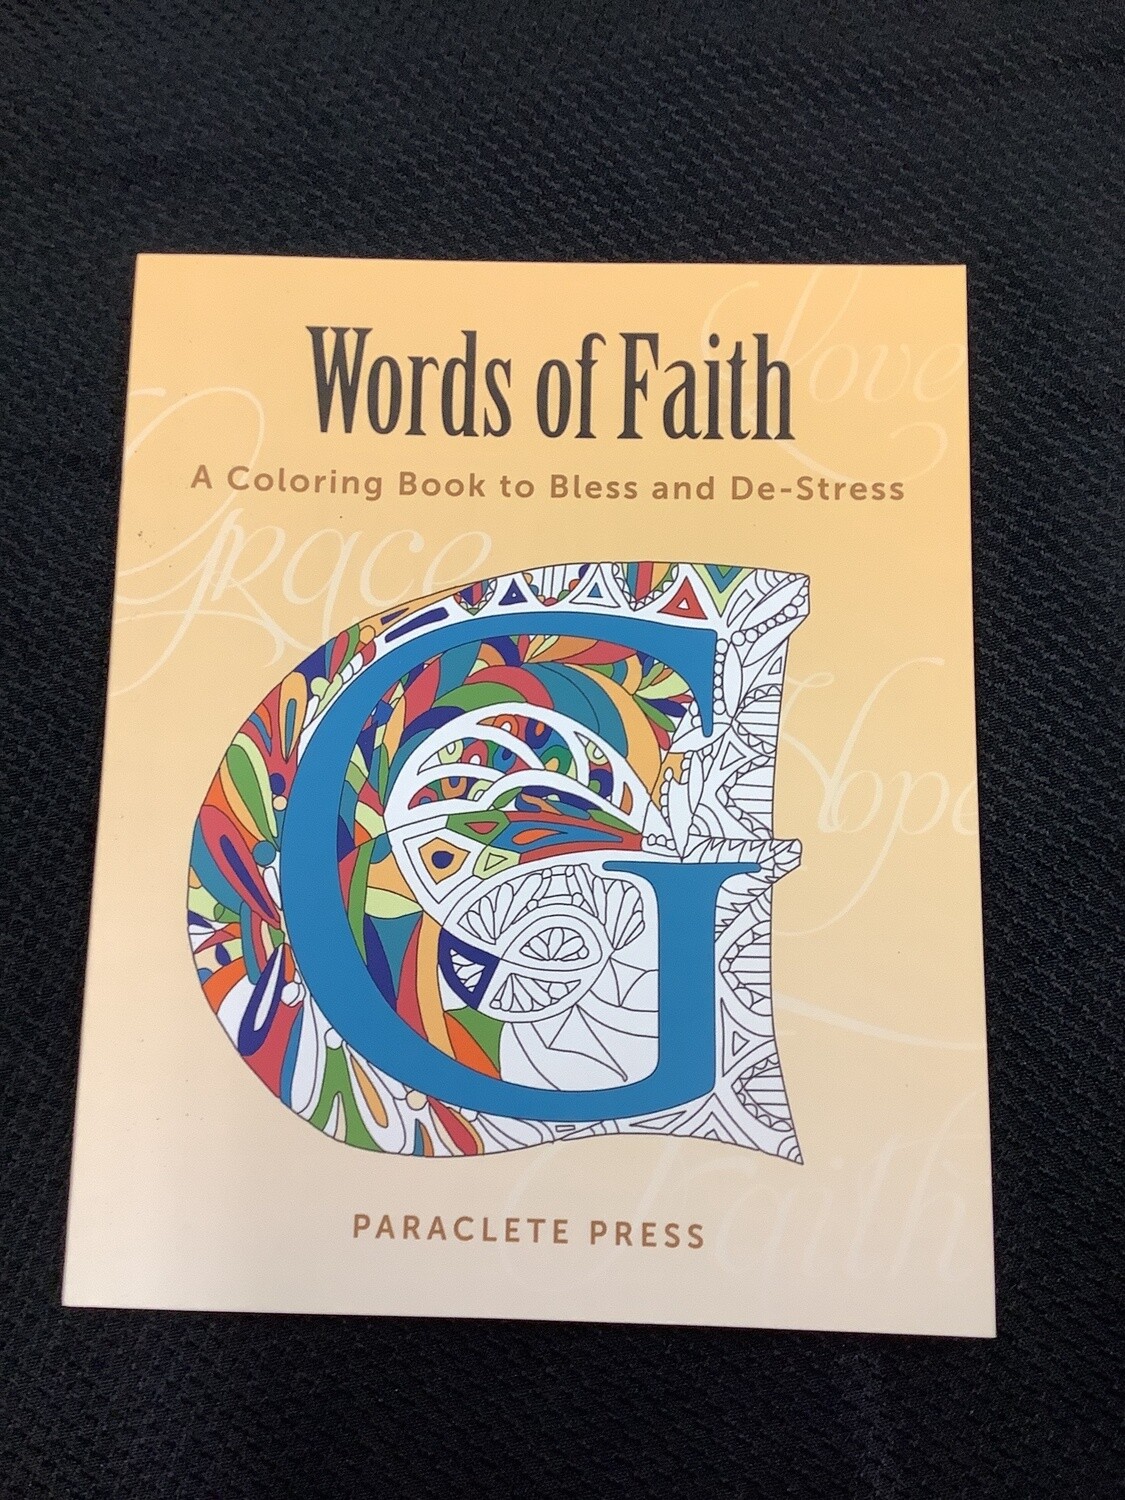 Words Of Faith A Coloring Book to Bless and Destress - Paraclete Press